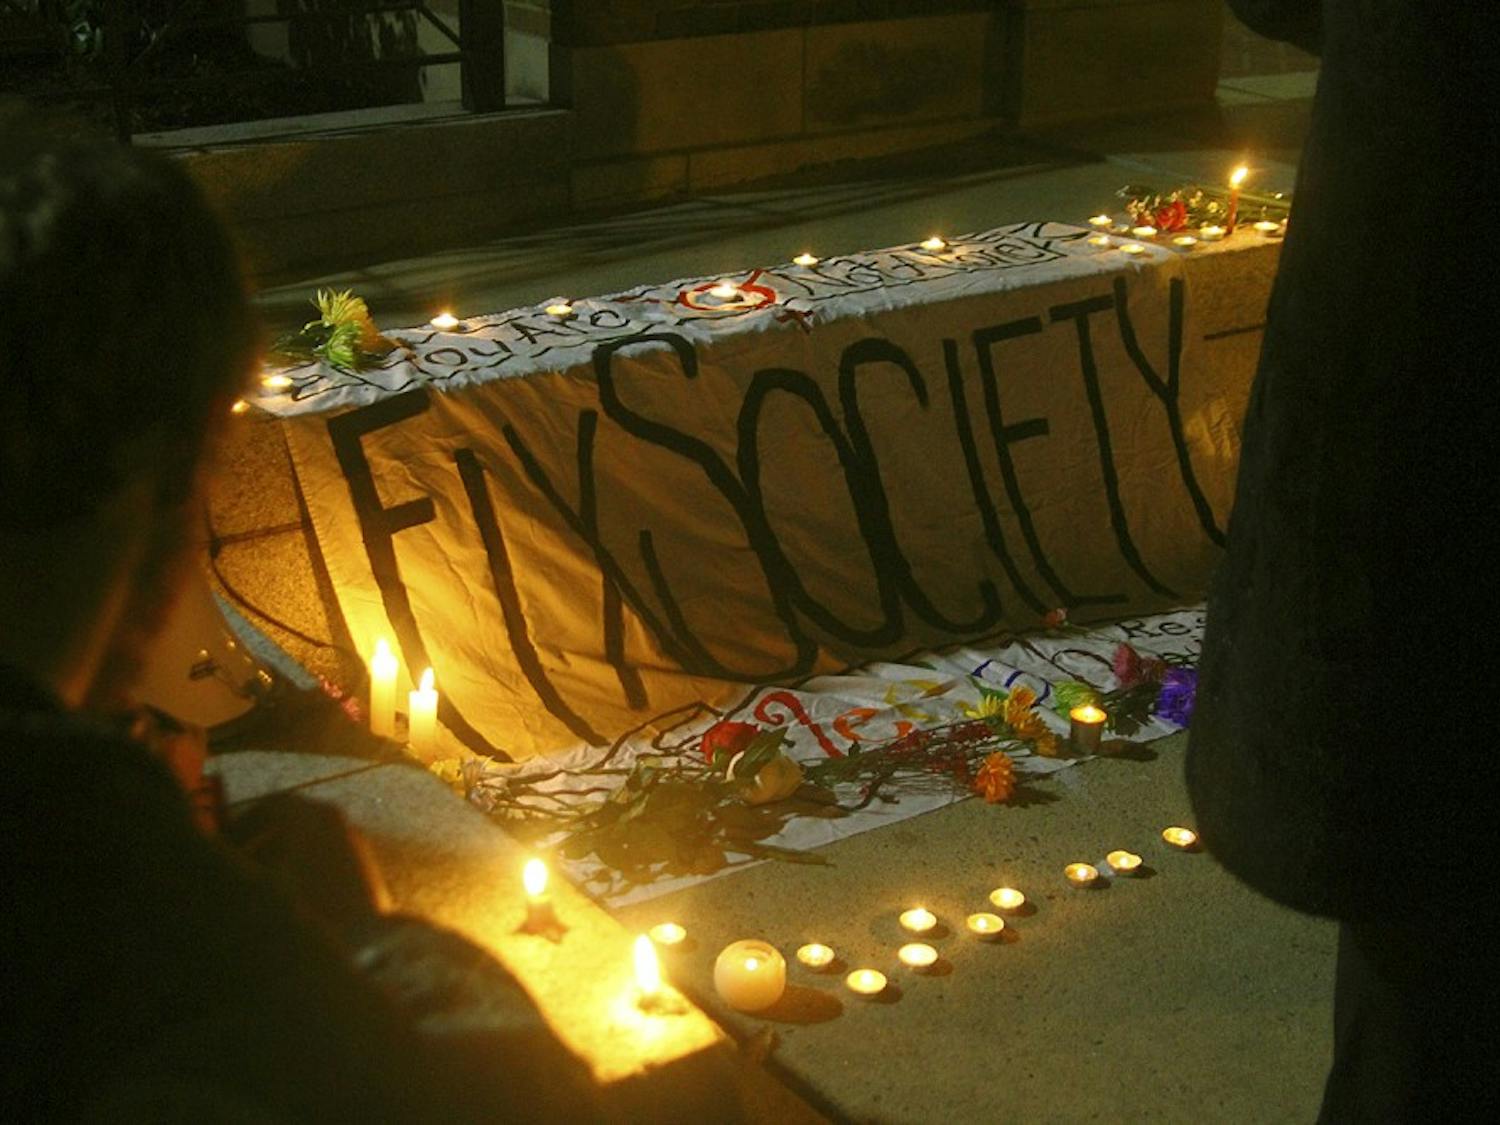 There was a vigil at Peace and Justice Plaza on Wednesday night, Jan. 28.